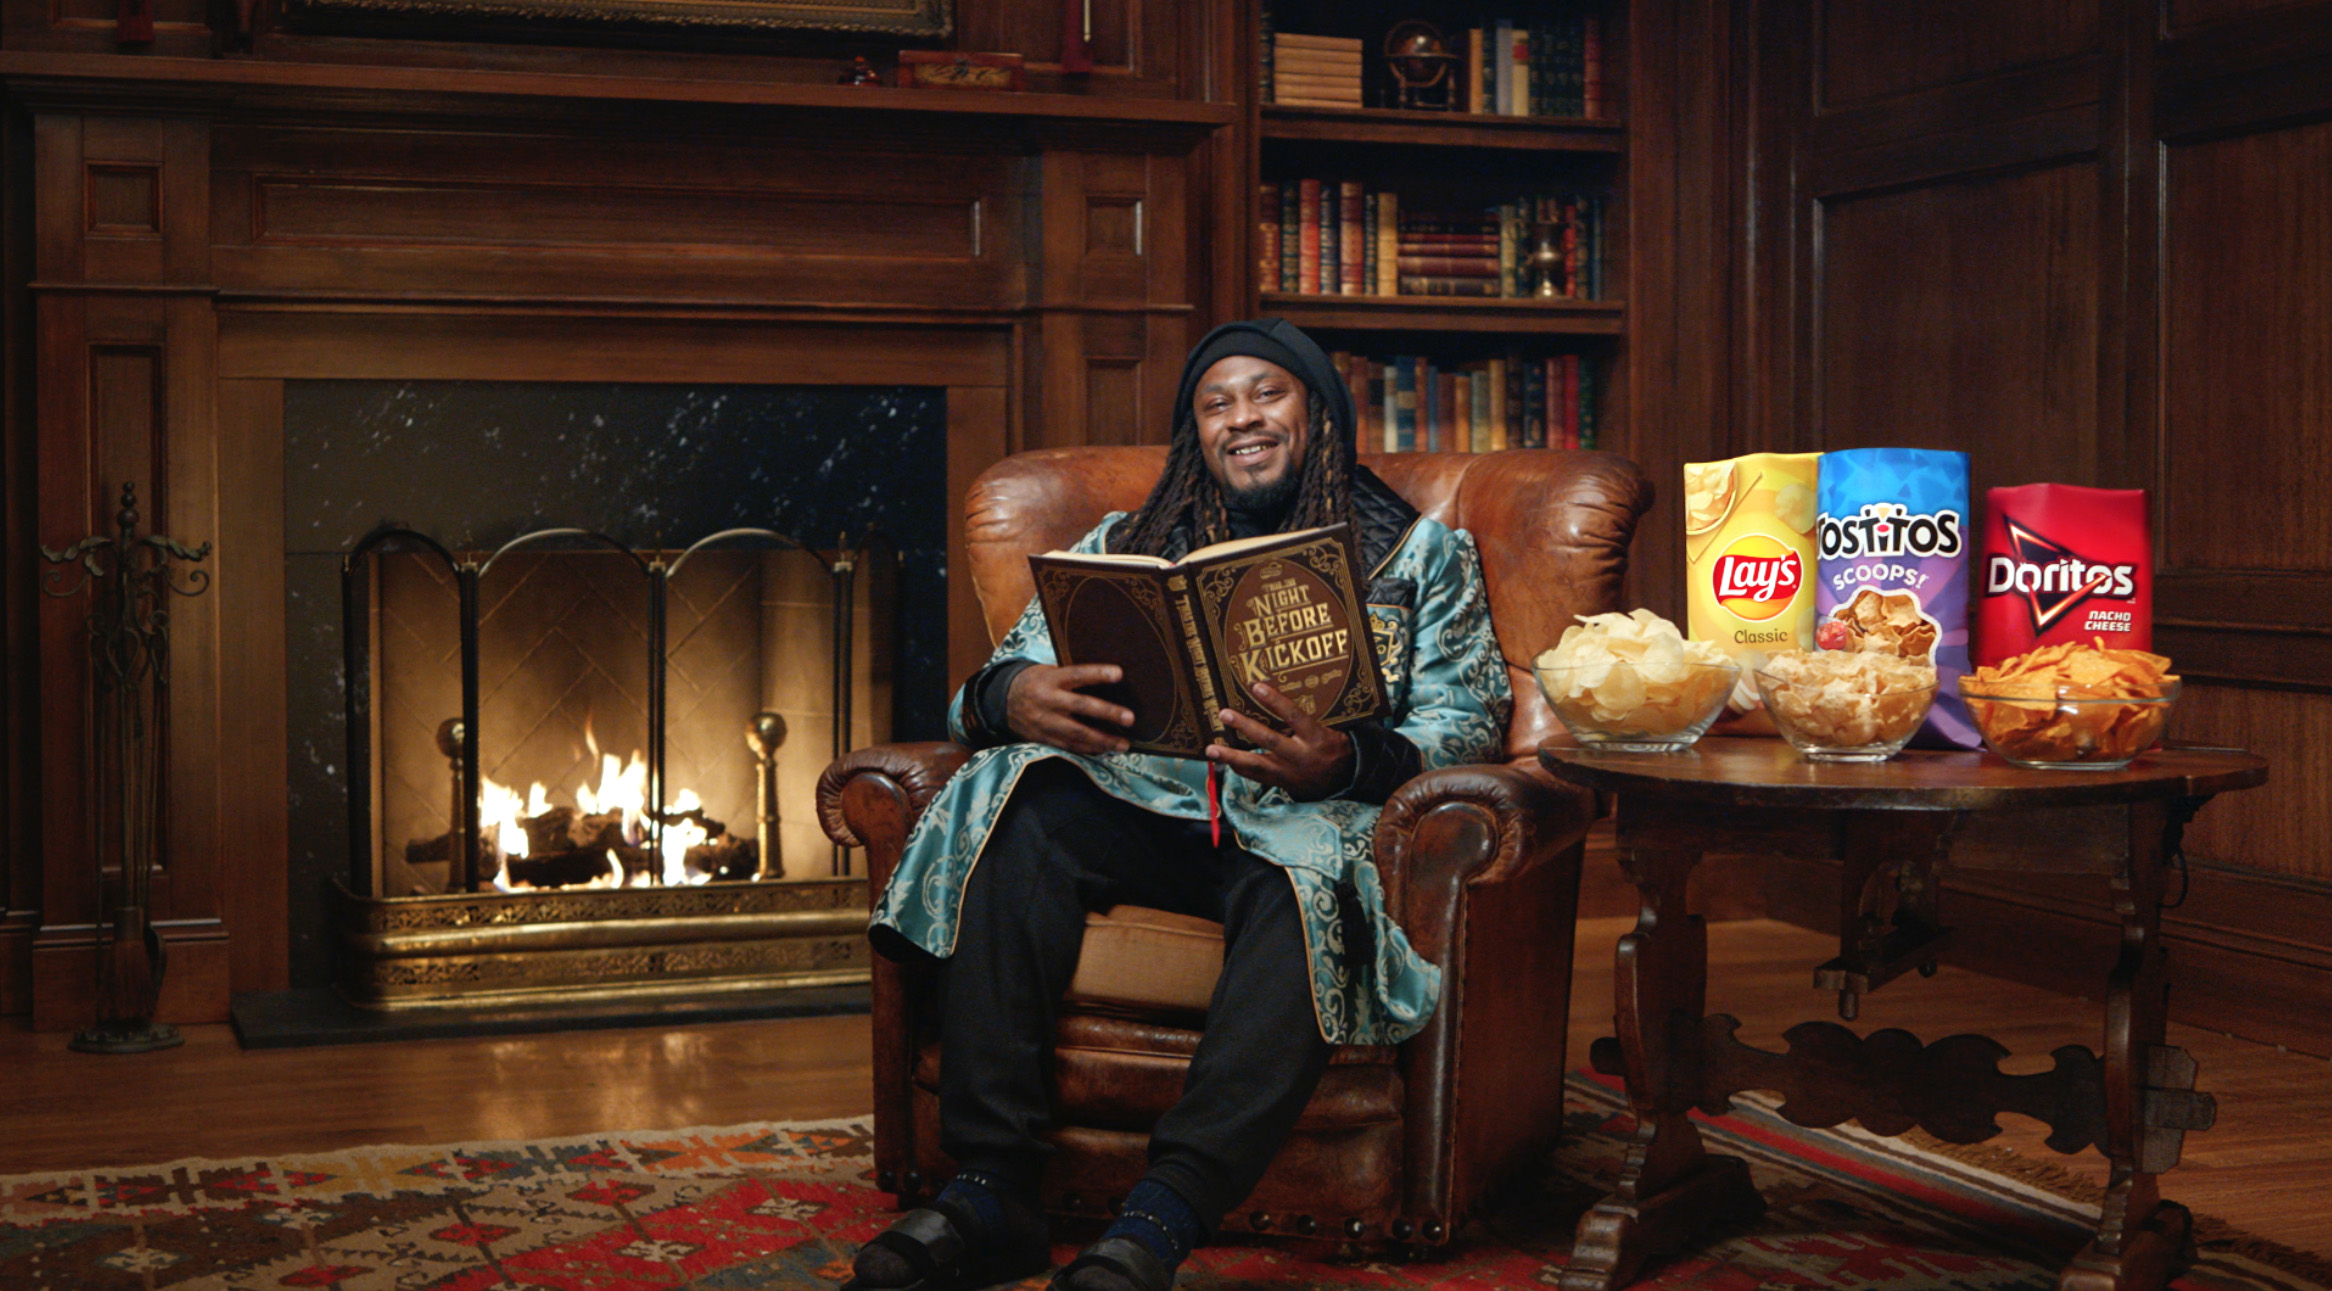 Marshawn reading in a chair